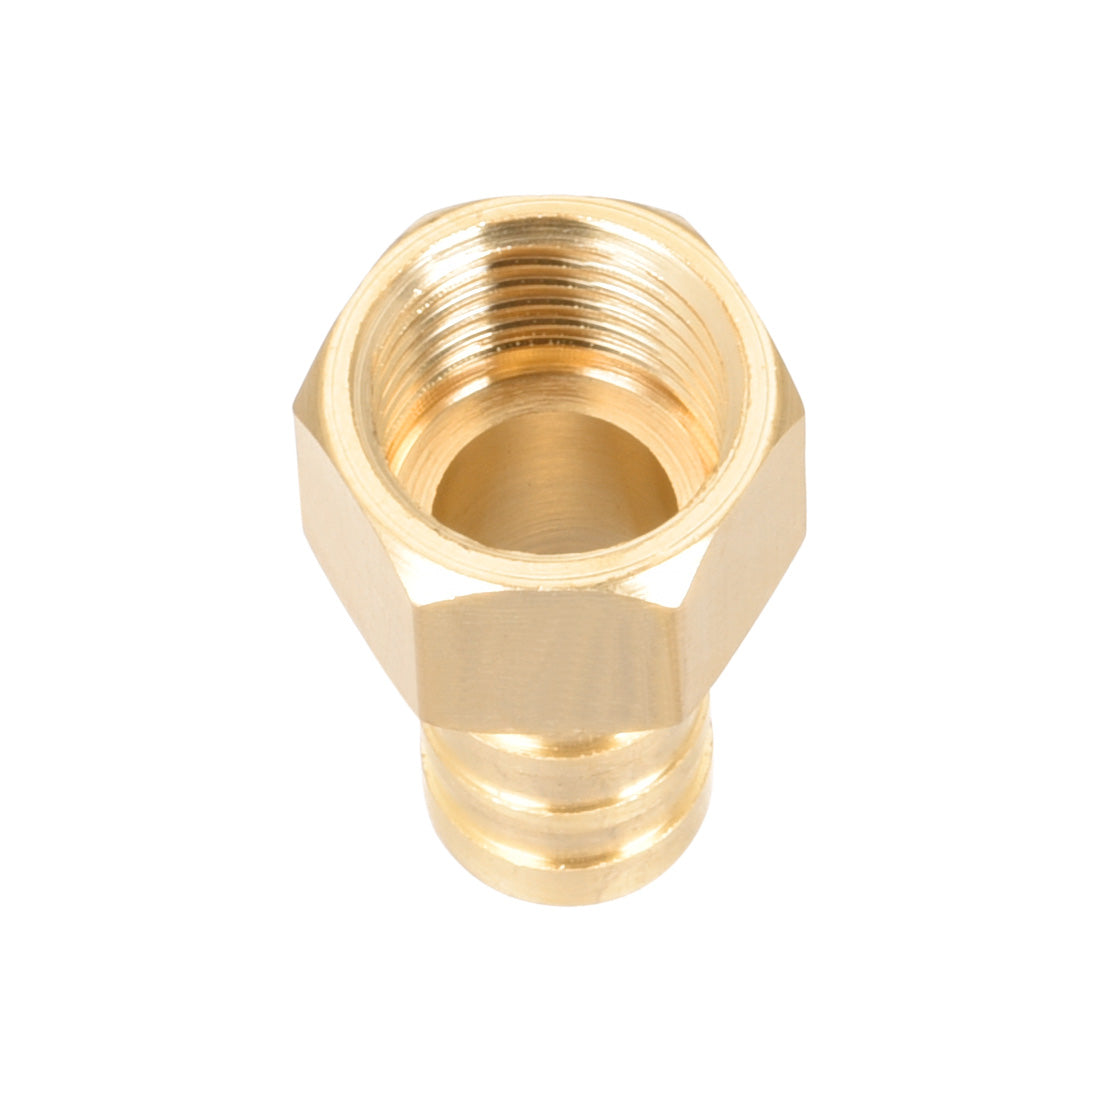 uxcell Uxcell Brass Barb Hose Fitting Connector Adapter 10mm Barbed x G1/4 Female Pipe 2pcs